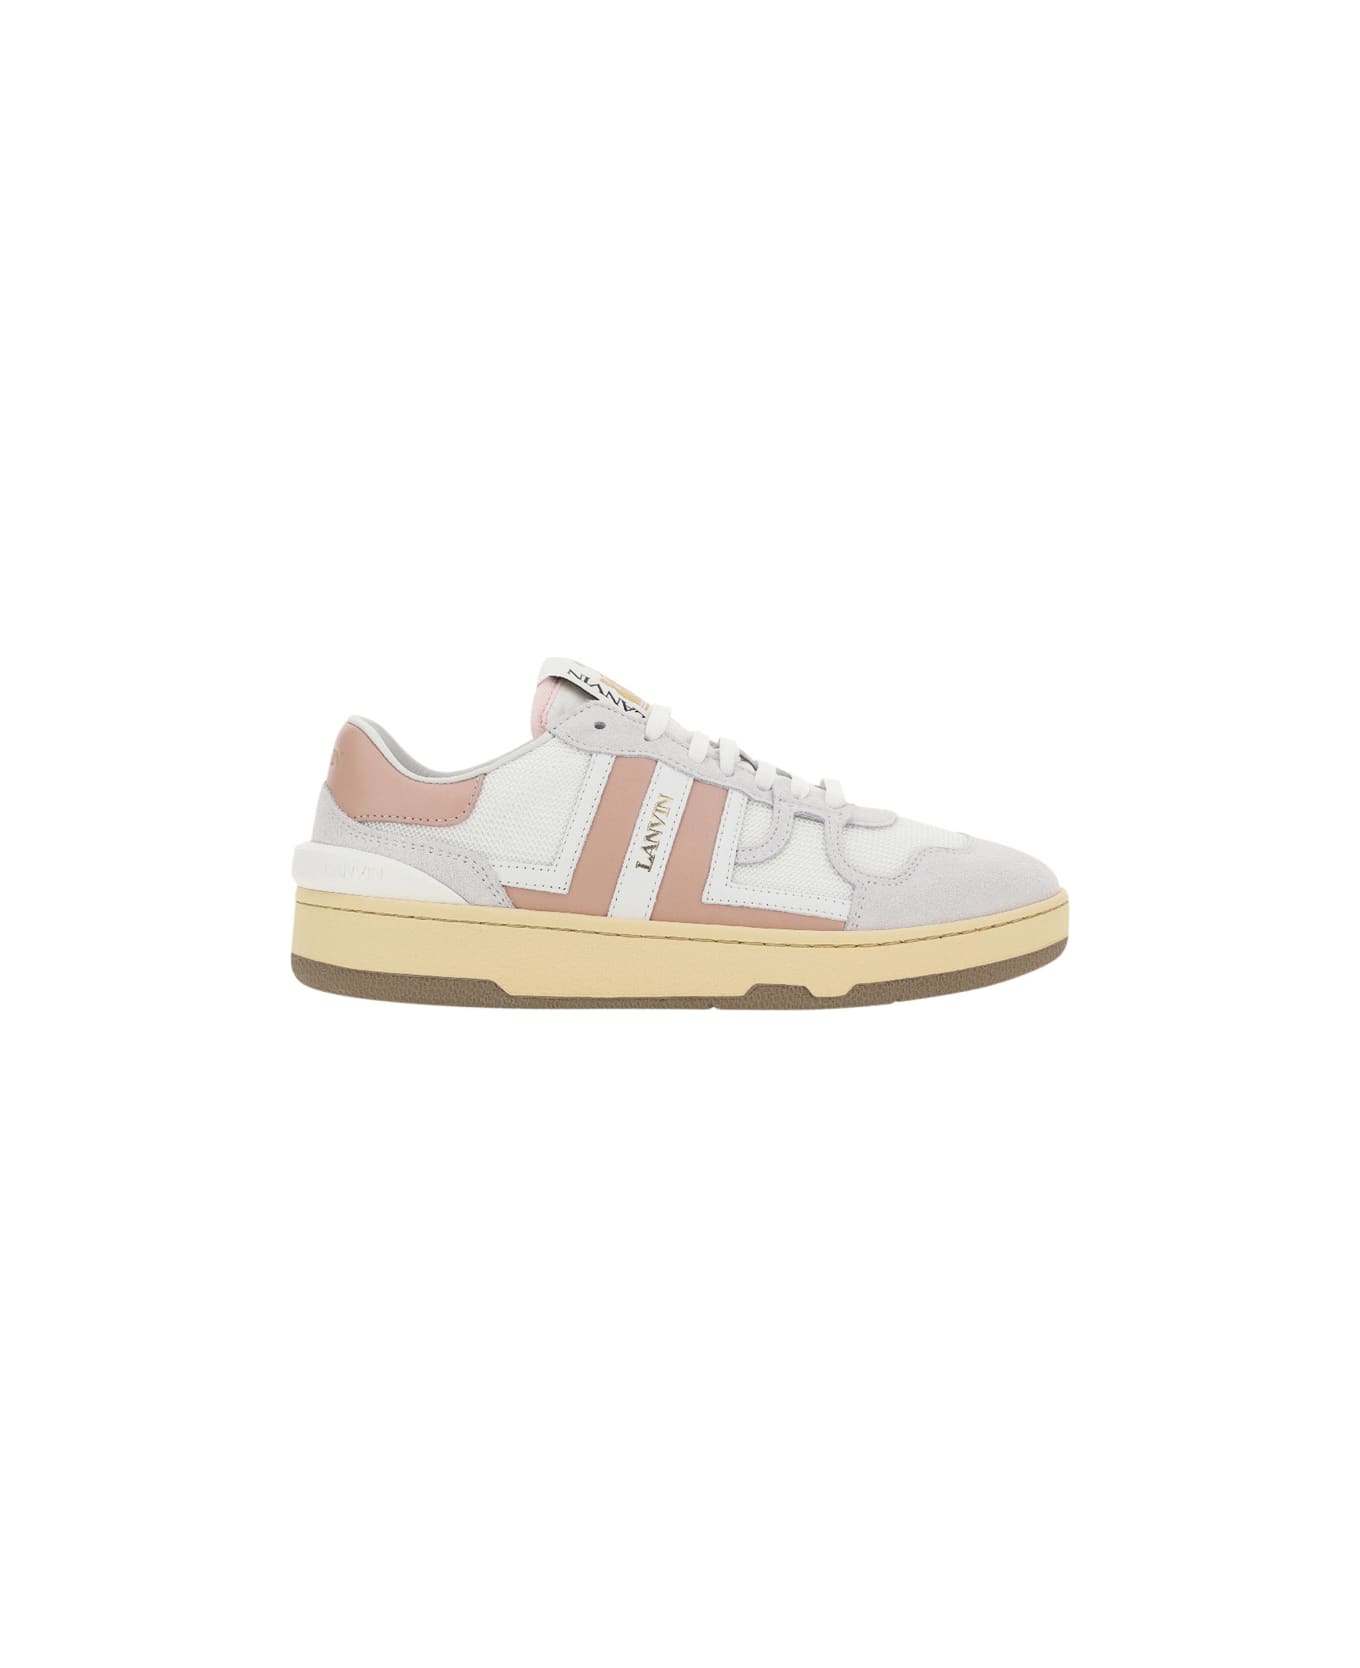 Lanvin Clay Sneakers - White/nude スニーカー